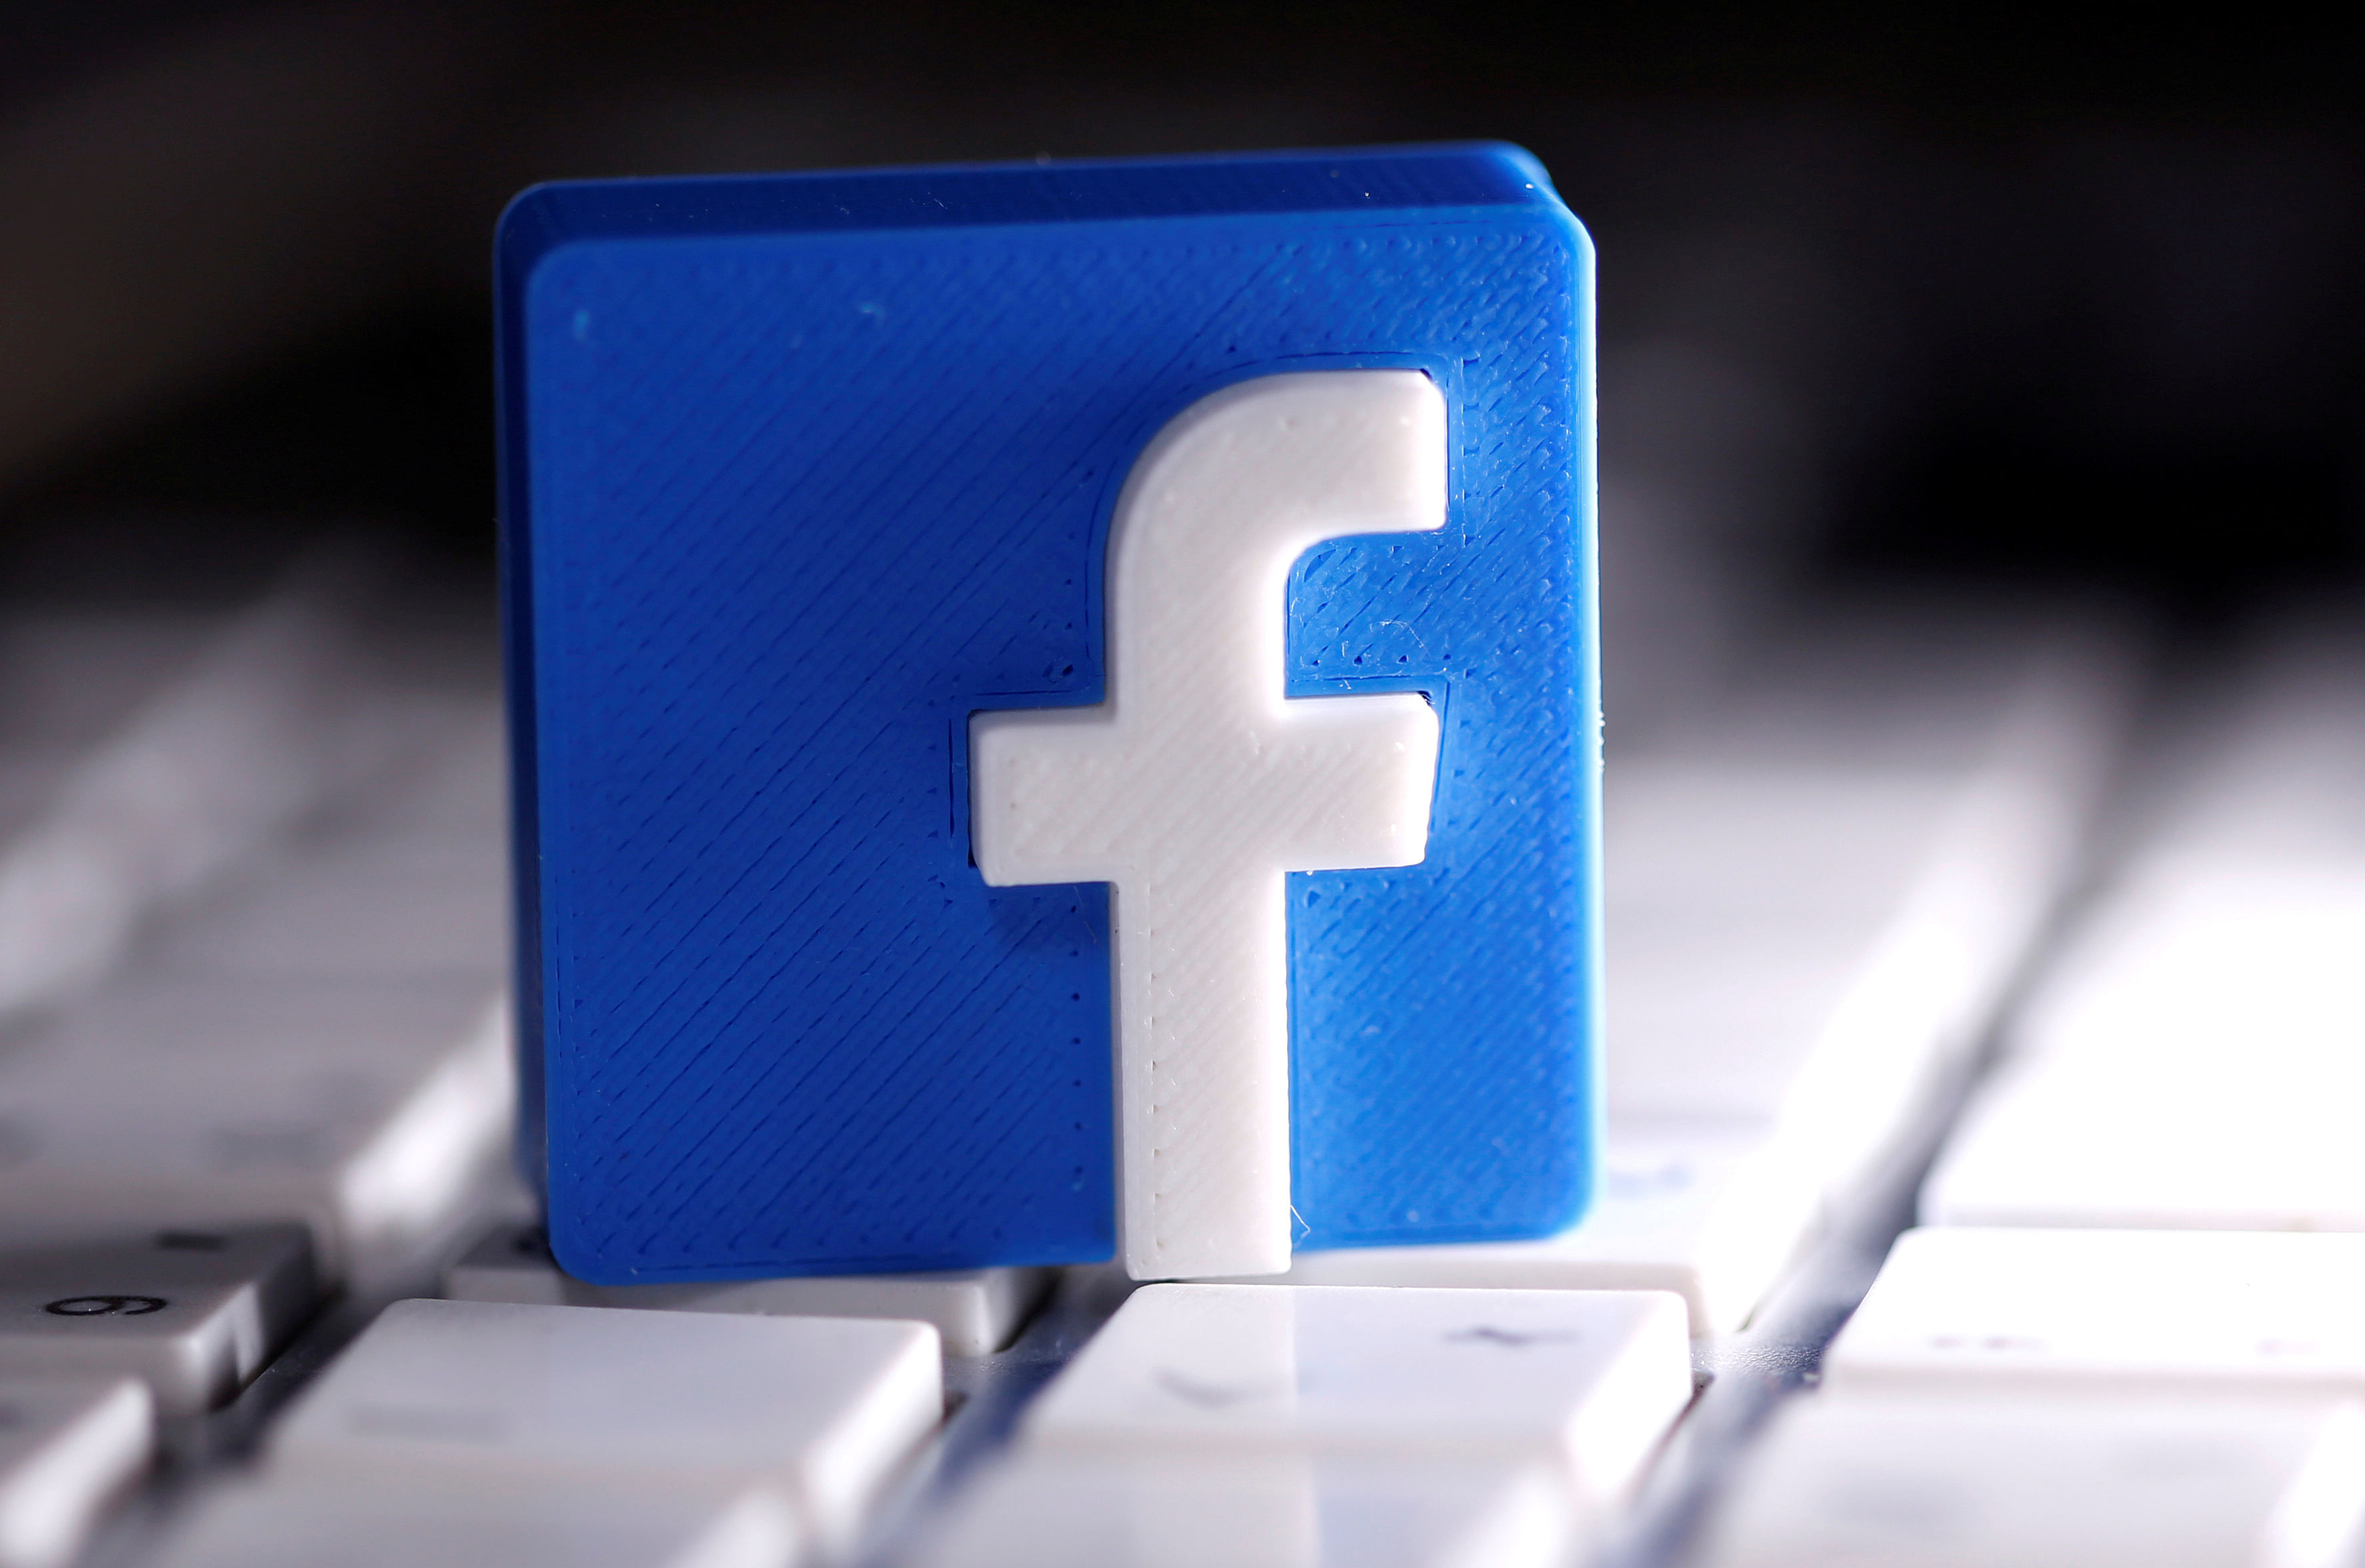 A 3D-printed Facebook logo is seen placed on a keyboard in this illustration. (Reuters Photo)